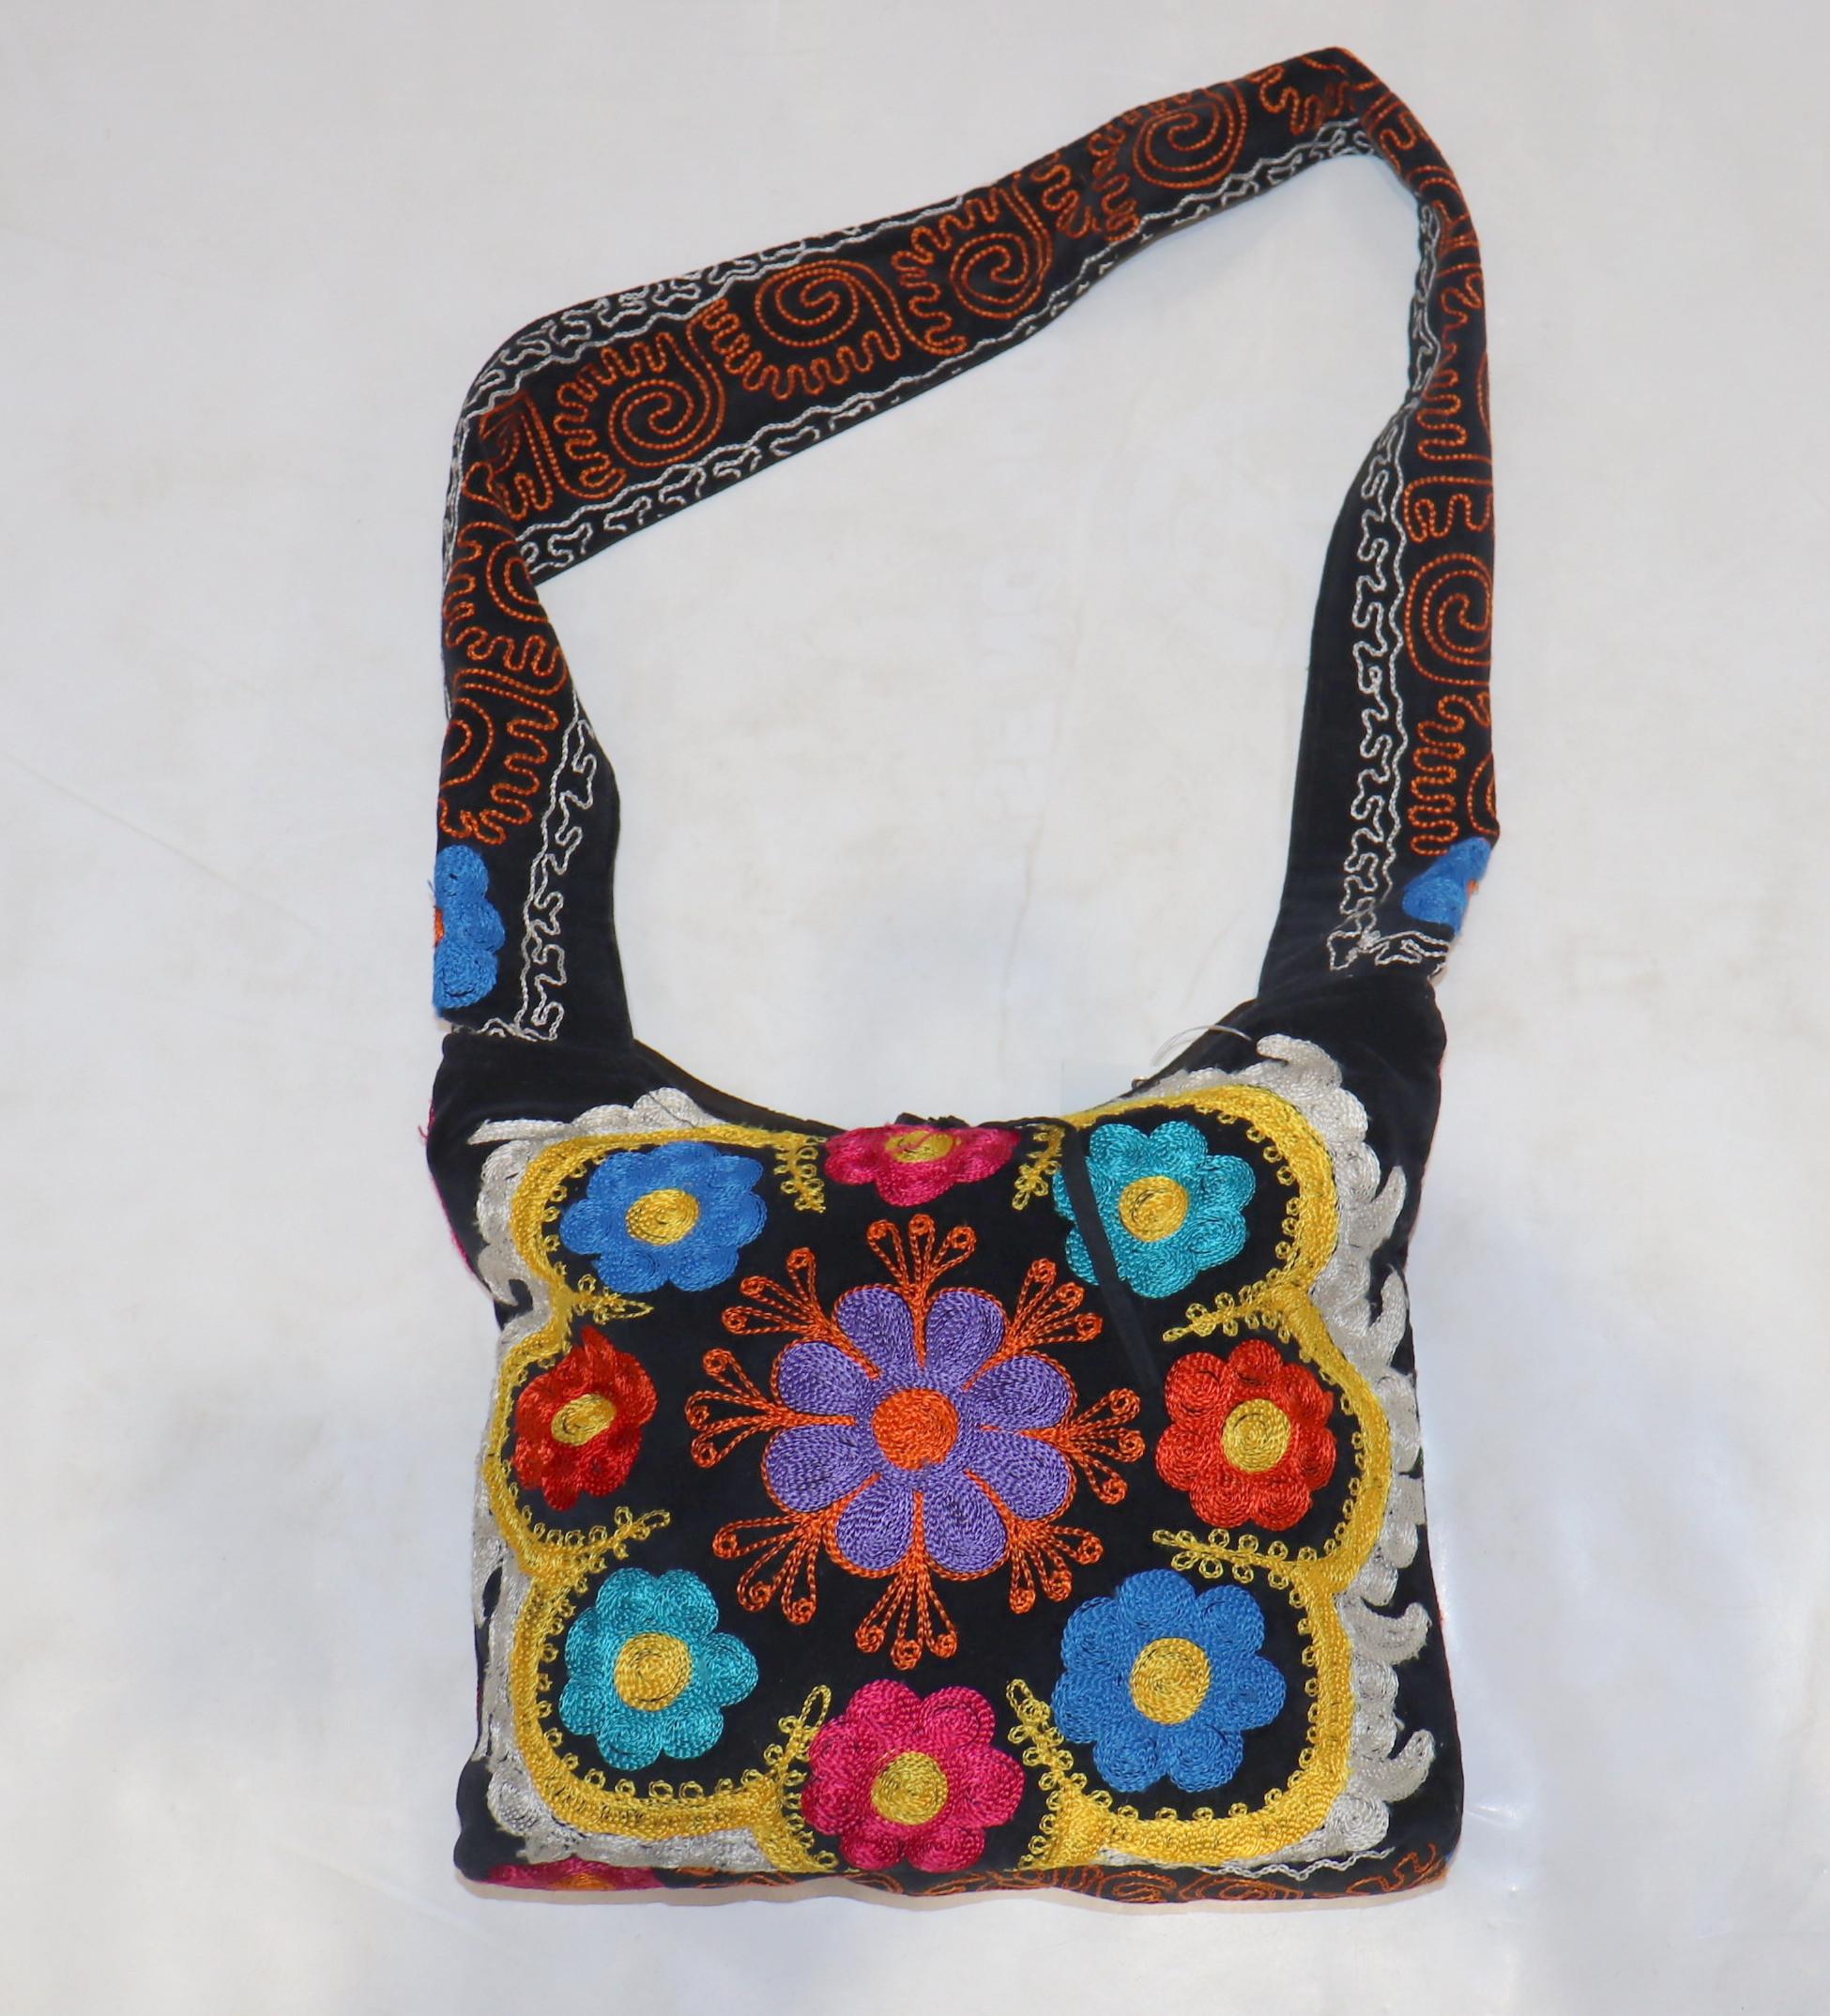 A handbag creatively hand-made from a vintage suzanni embroidery

Measures: 13'' inches long.